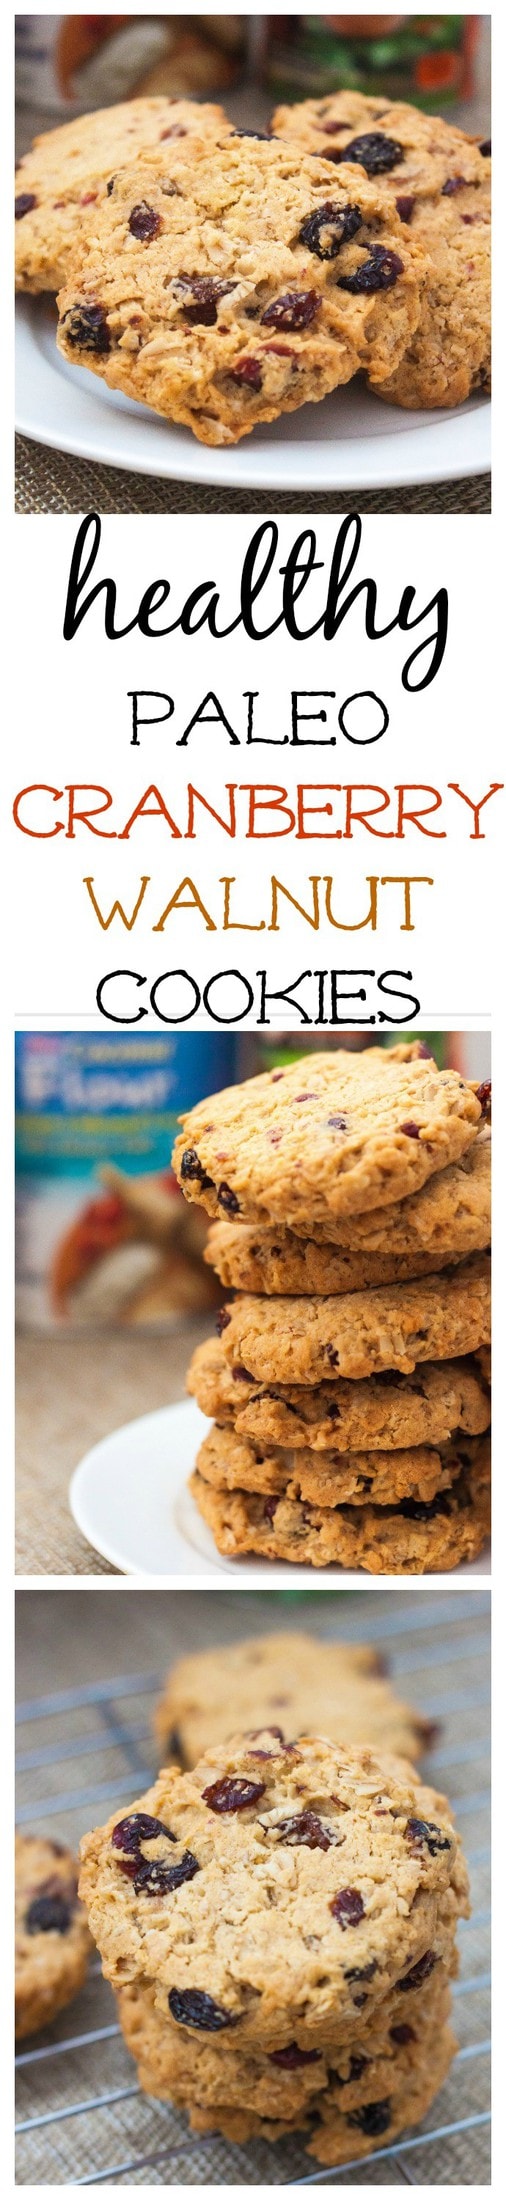 Paleo Cranberry Walnut Cookies- 20 minutes between you and these chewy, delicious cookies which are paleo and grain free! @thebigmansworld - thebigmansworld.com